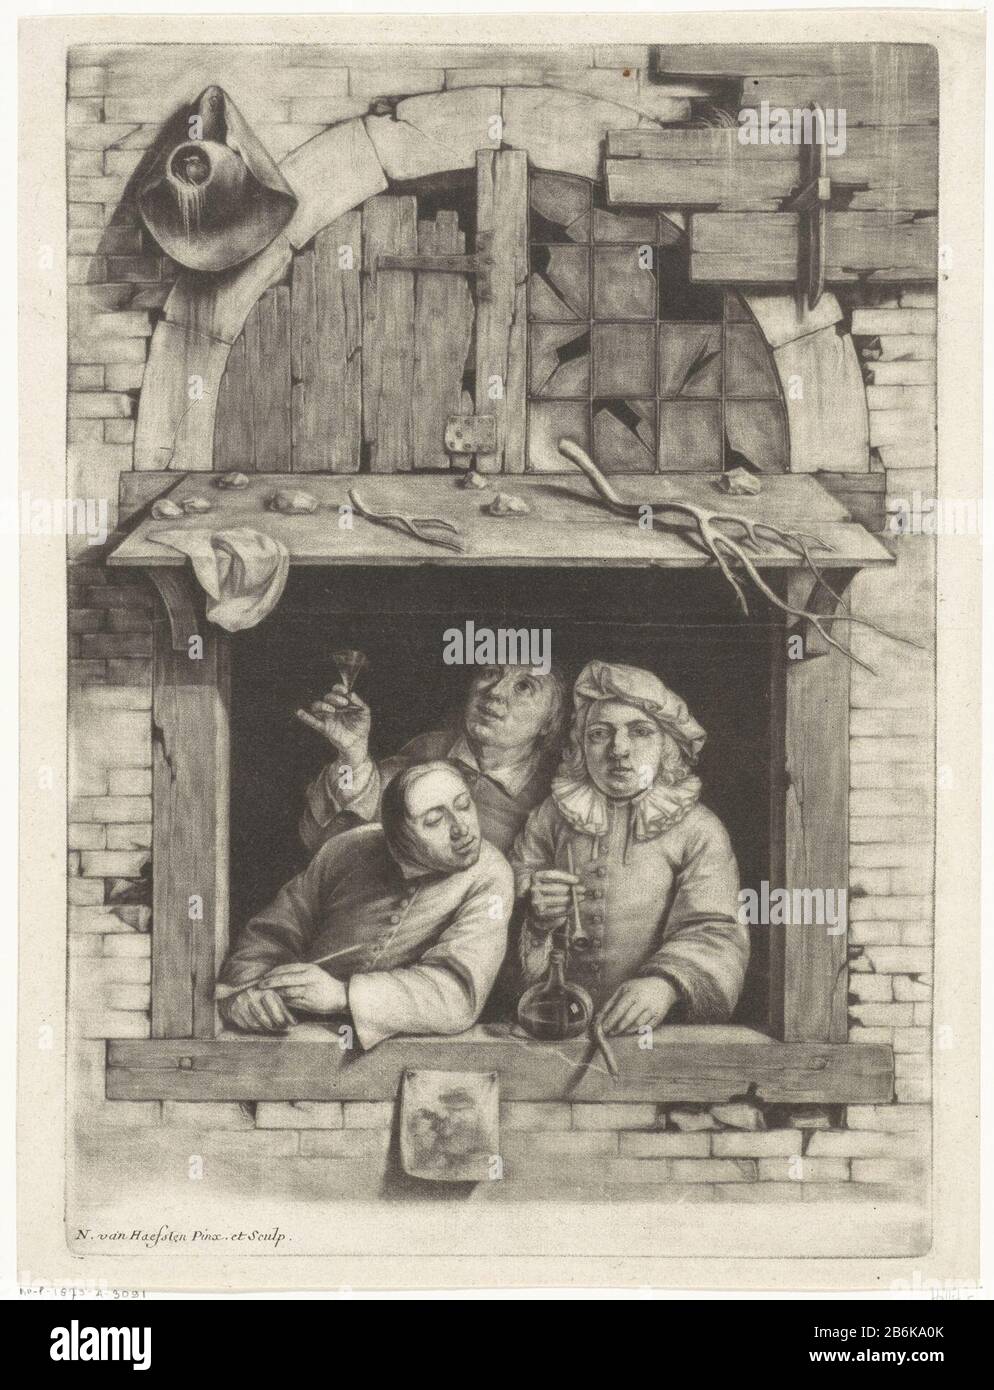 Three smokers in a window Three drinking and smoking men standing behind an open window. On the roof above the window are stones and branches or pieces of an antler. On the outside of the window, hang a hat and afbeelding. Manufacturer : printmaker: Nicolaes van Haeften (listed property) Place manufacture: Antwerp Date: 1673 - 1715 Physical features: mezzotint and engra material: paper Technique: mezzotint / engra (printing process) Dimensions: plate edge: h 337 mm × W 241 mm Subject: drinking-vessel pipe  tobaccopicture, painting print, eg: engra, etching, lithograph Stock Photo